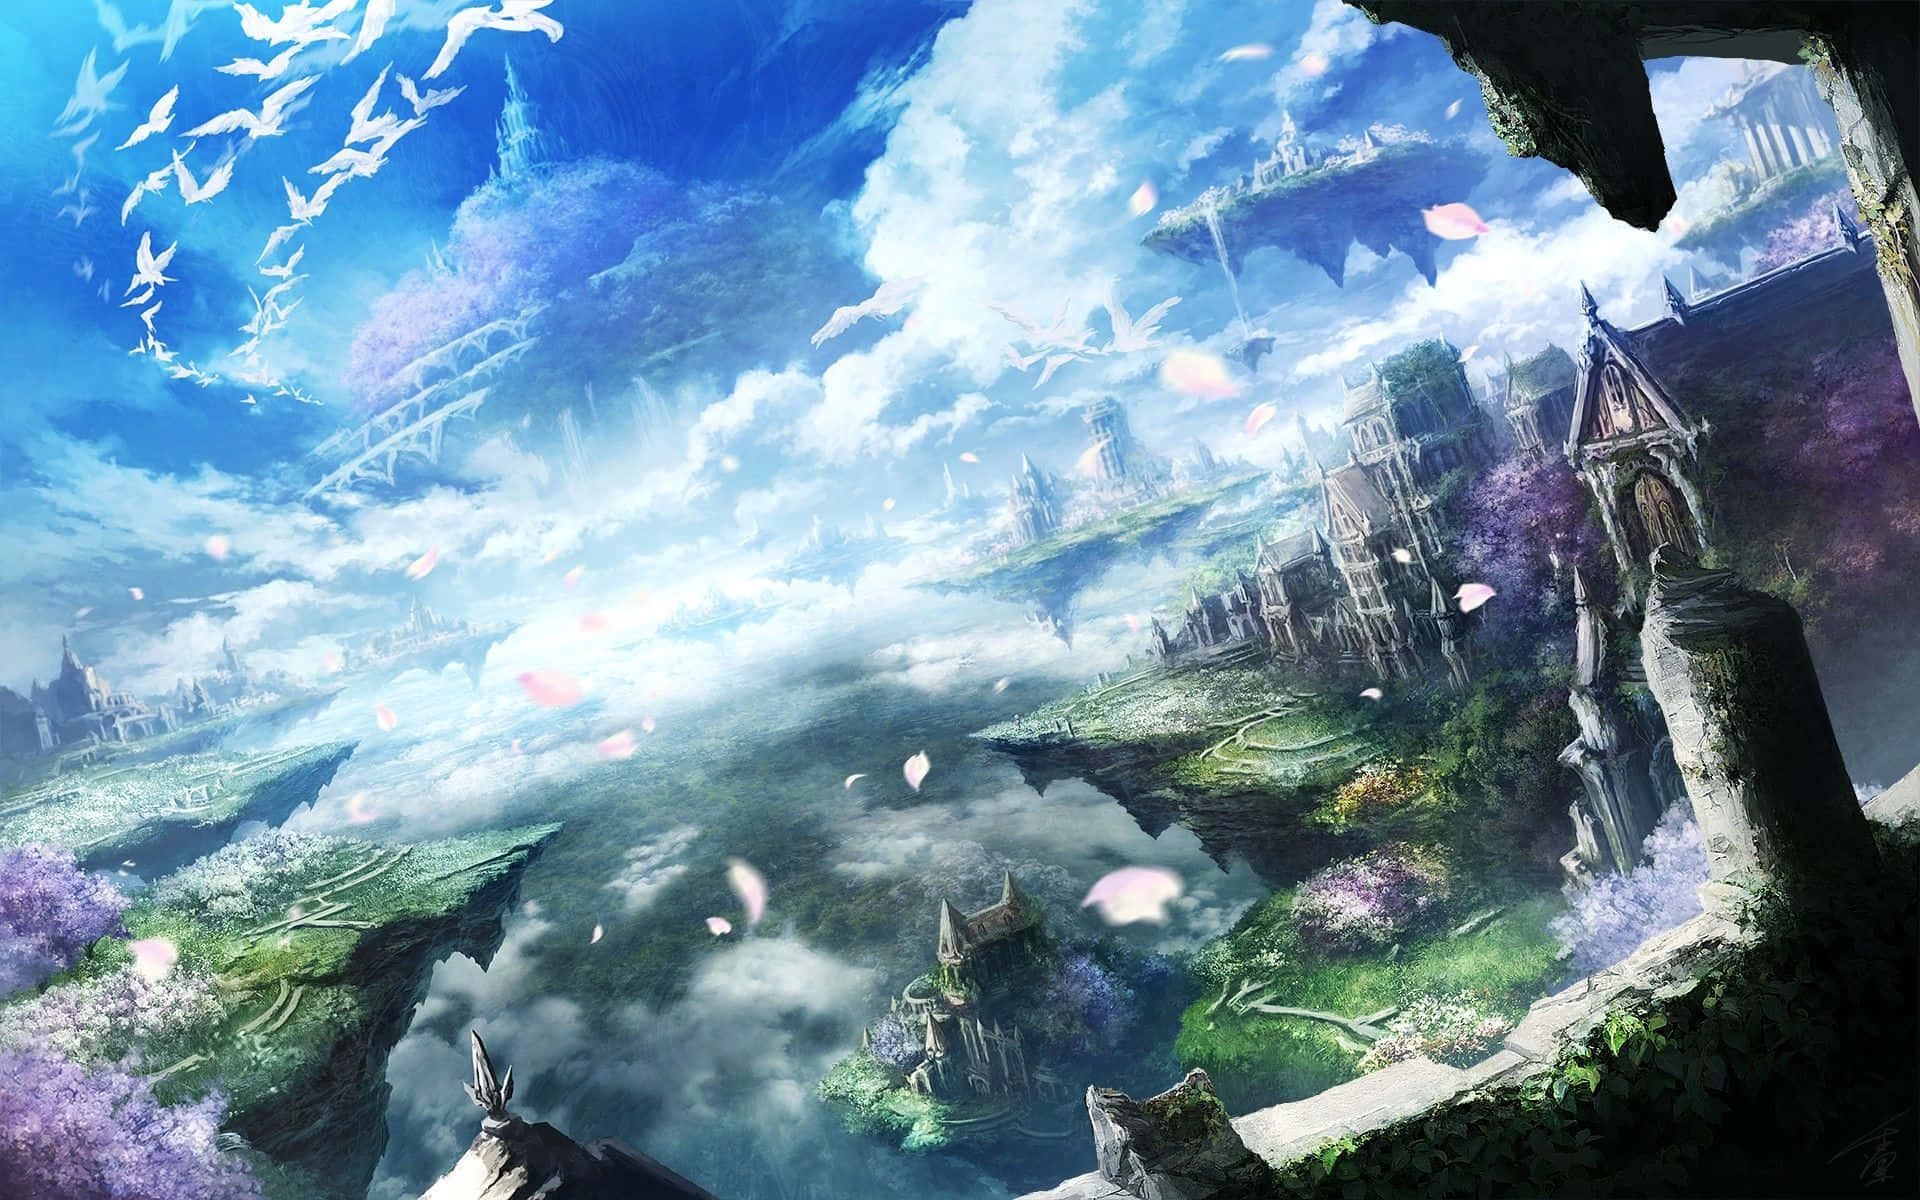 Adventure Awaits In This Fantasy Anime Landscape Wallpaper